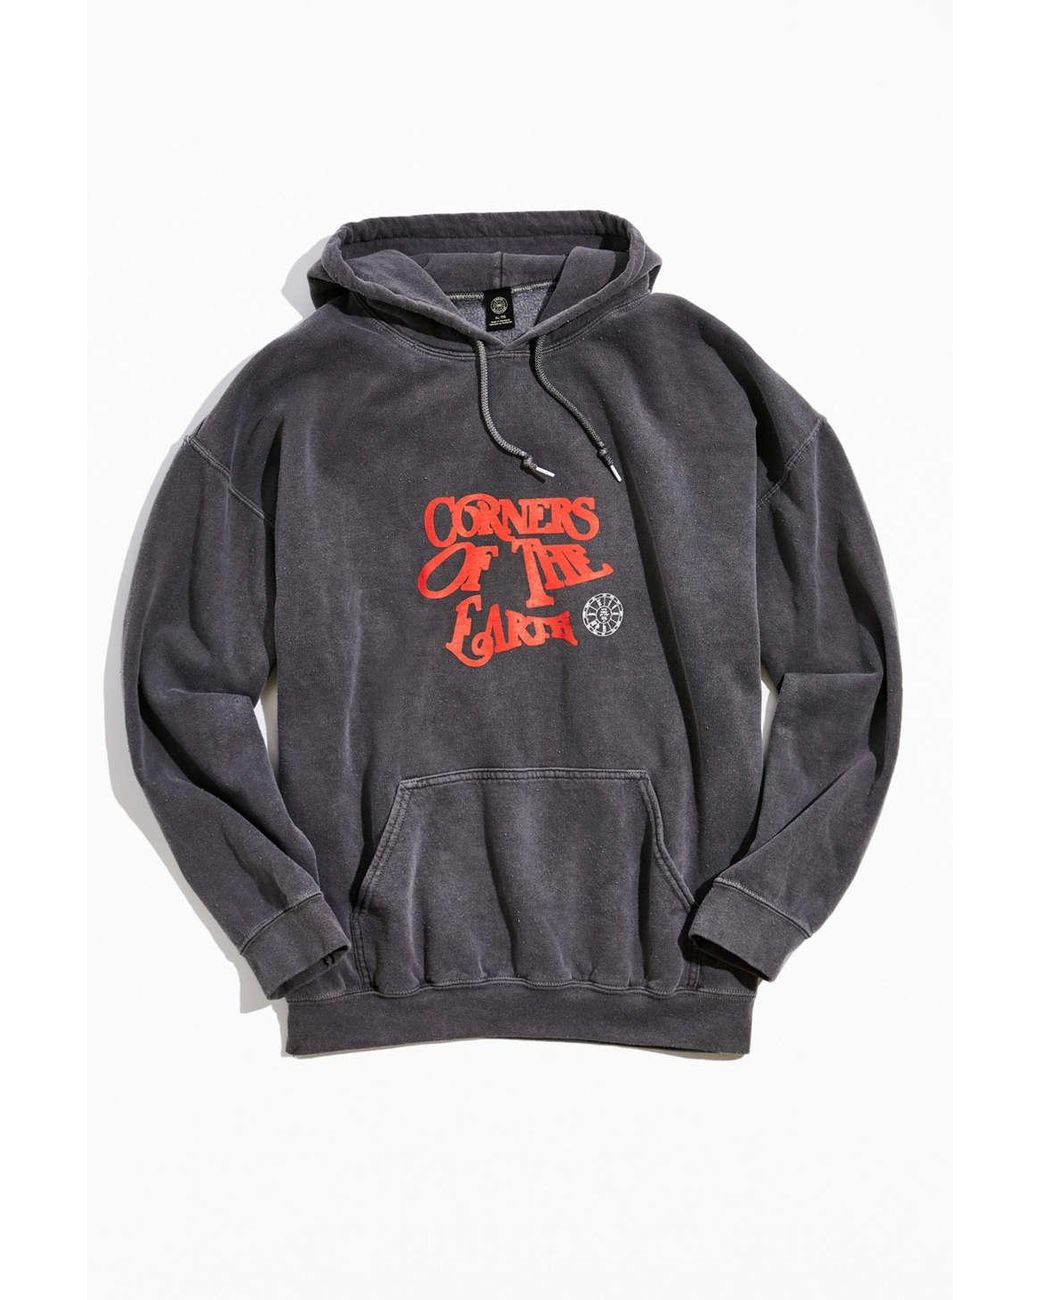 Urban Outfitters Corner Of The Earth Overdyed Hoodie Sweatshirt in Gray ...